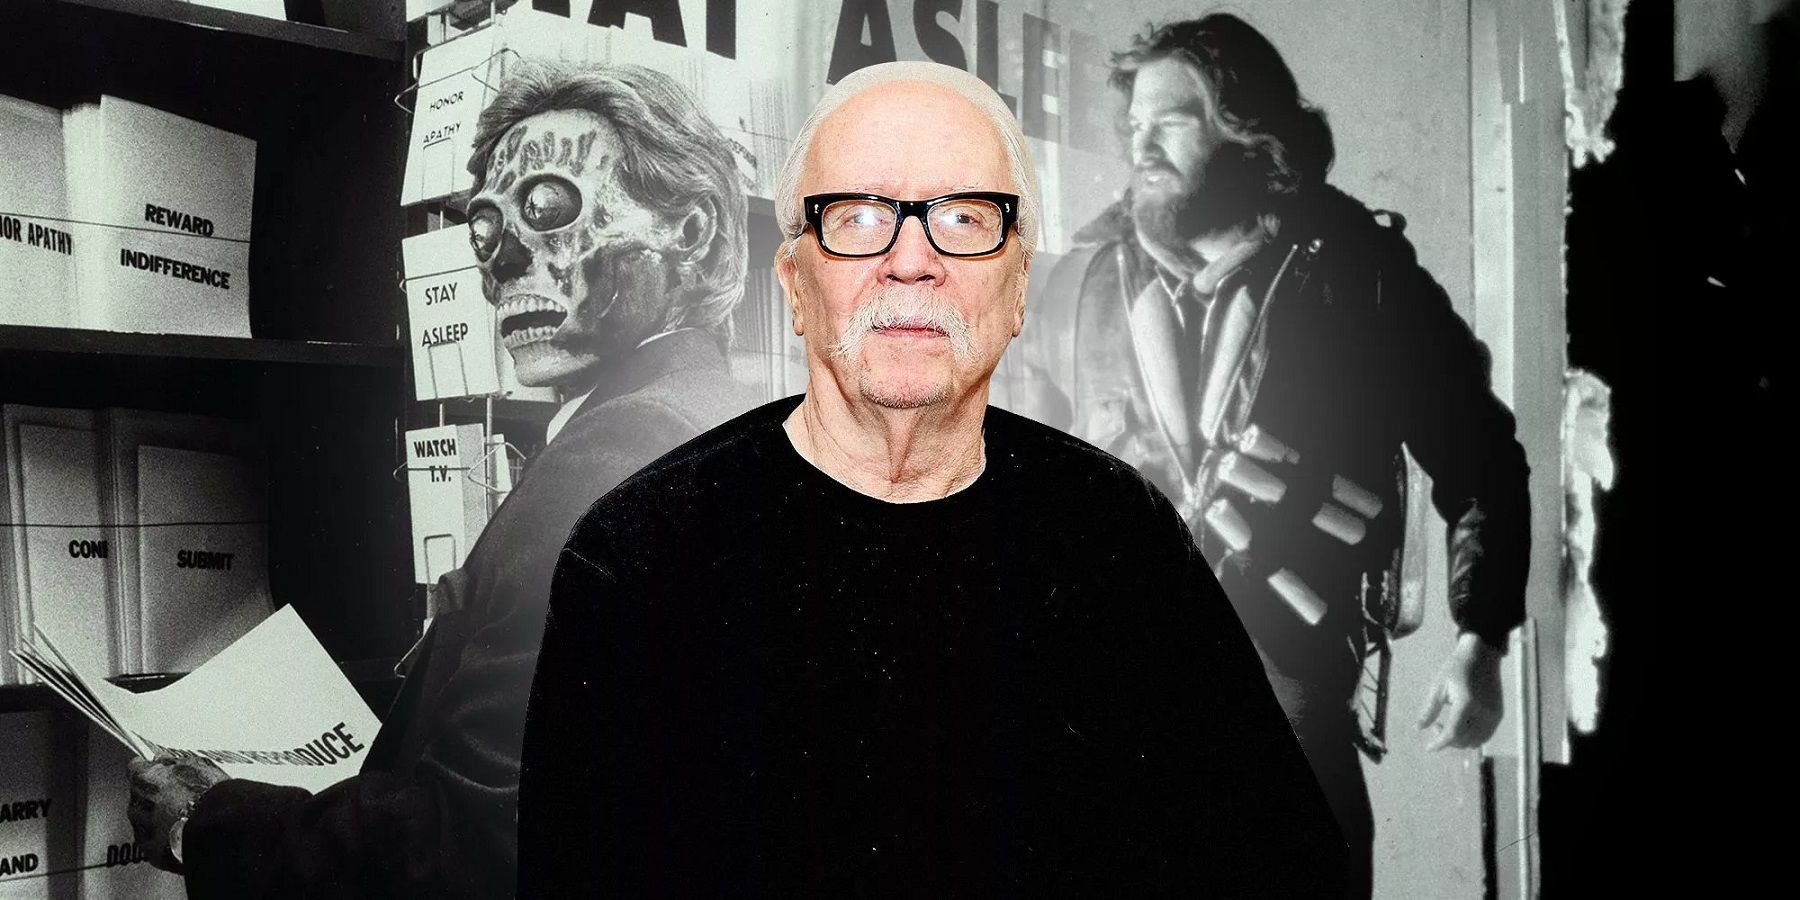 Image of John Carpenter in front of black and white stills of They Live and The Thing.